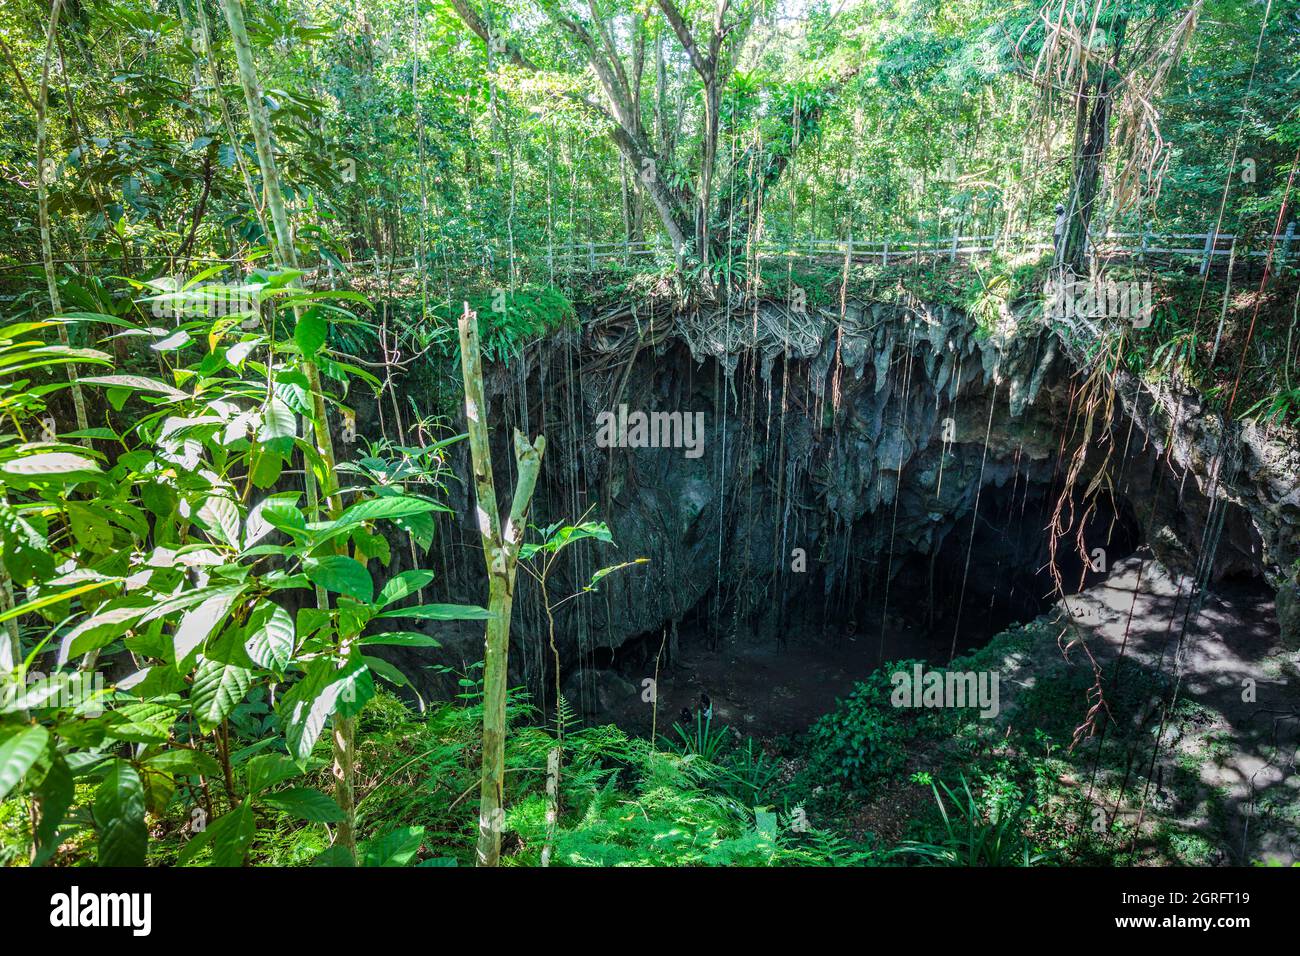 Indonesia, Papua, Biak Island, Goa Jepang, the Japanese Cave served as a base and hiding place for Japanese soldiers during World War II. In 1944, 3000 Japanese died there when the US military drilled a hole in the top of the cave, pourred oil in it, and then bombed it. Stock Photo